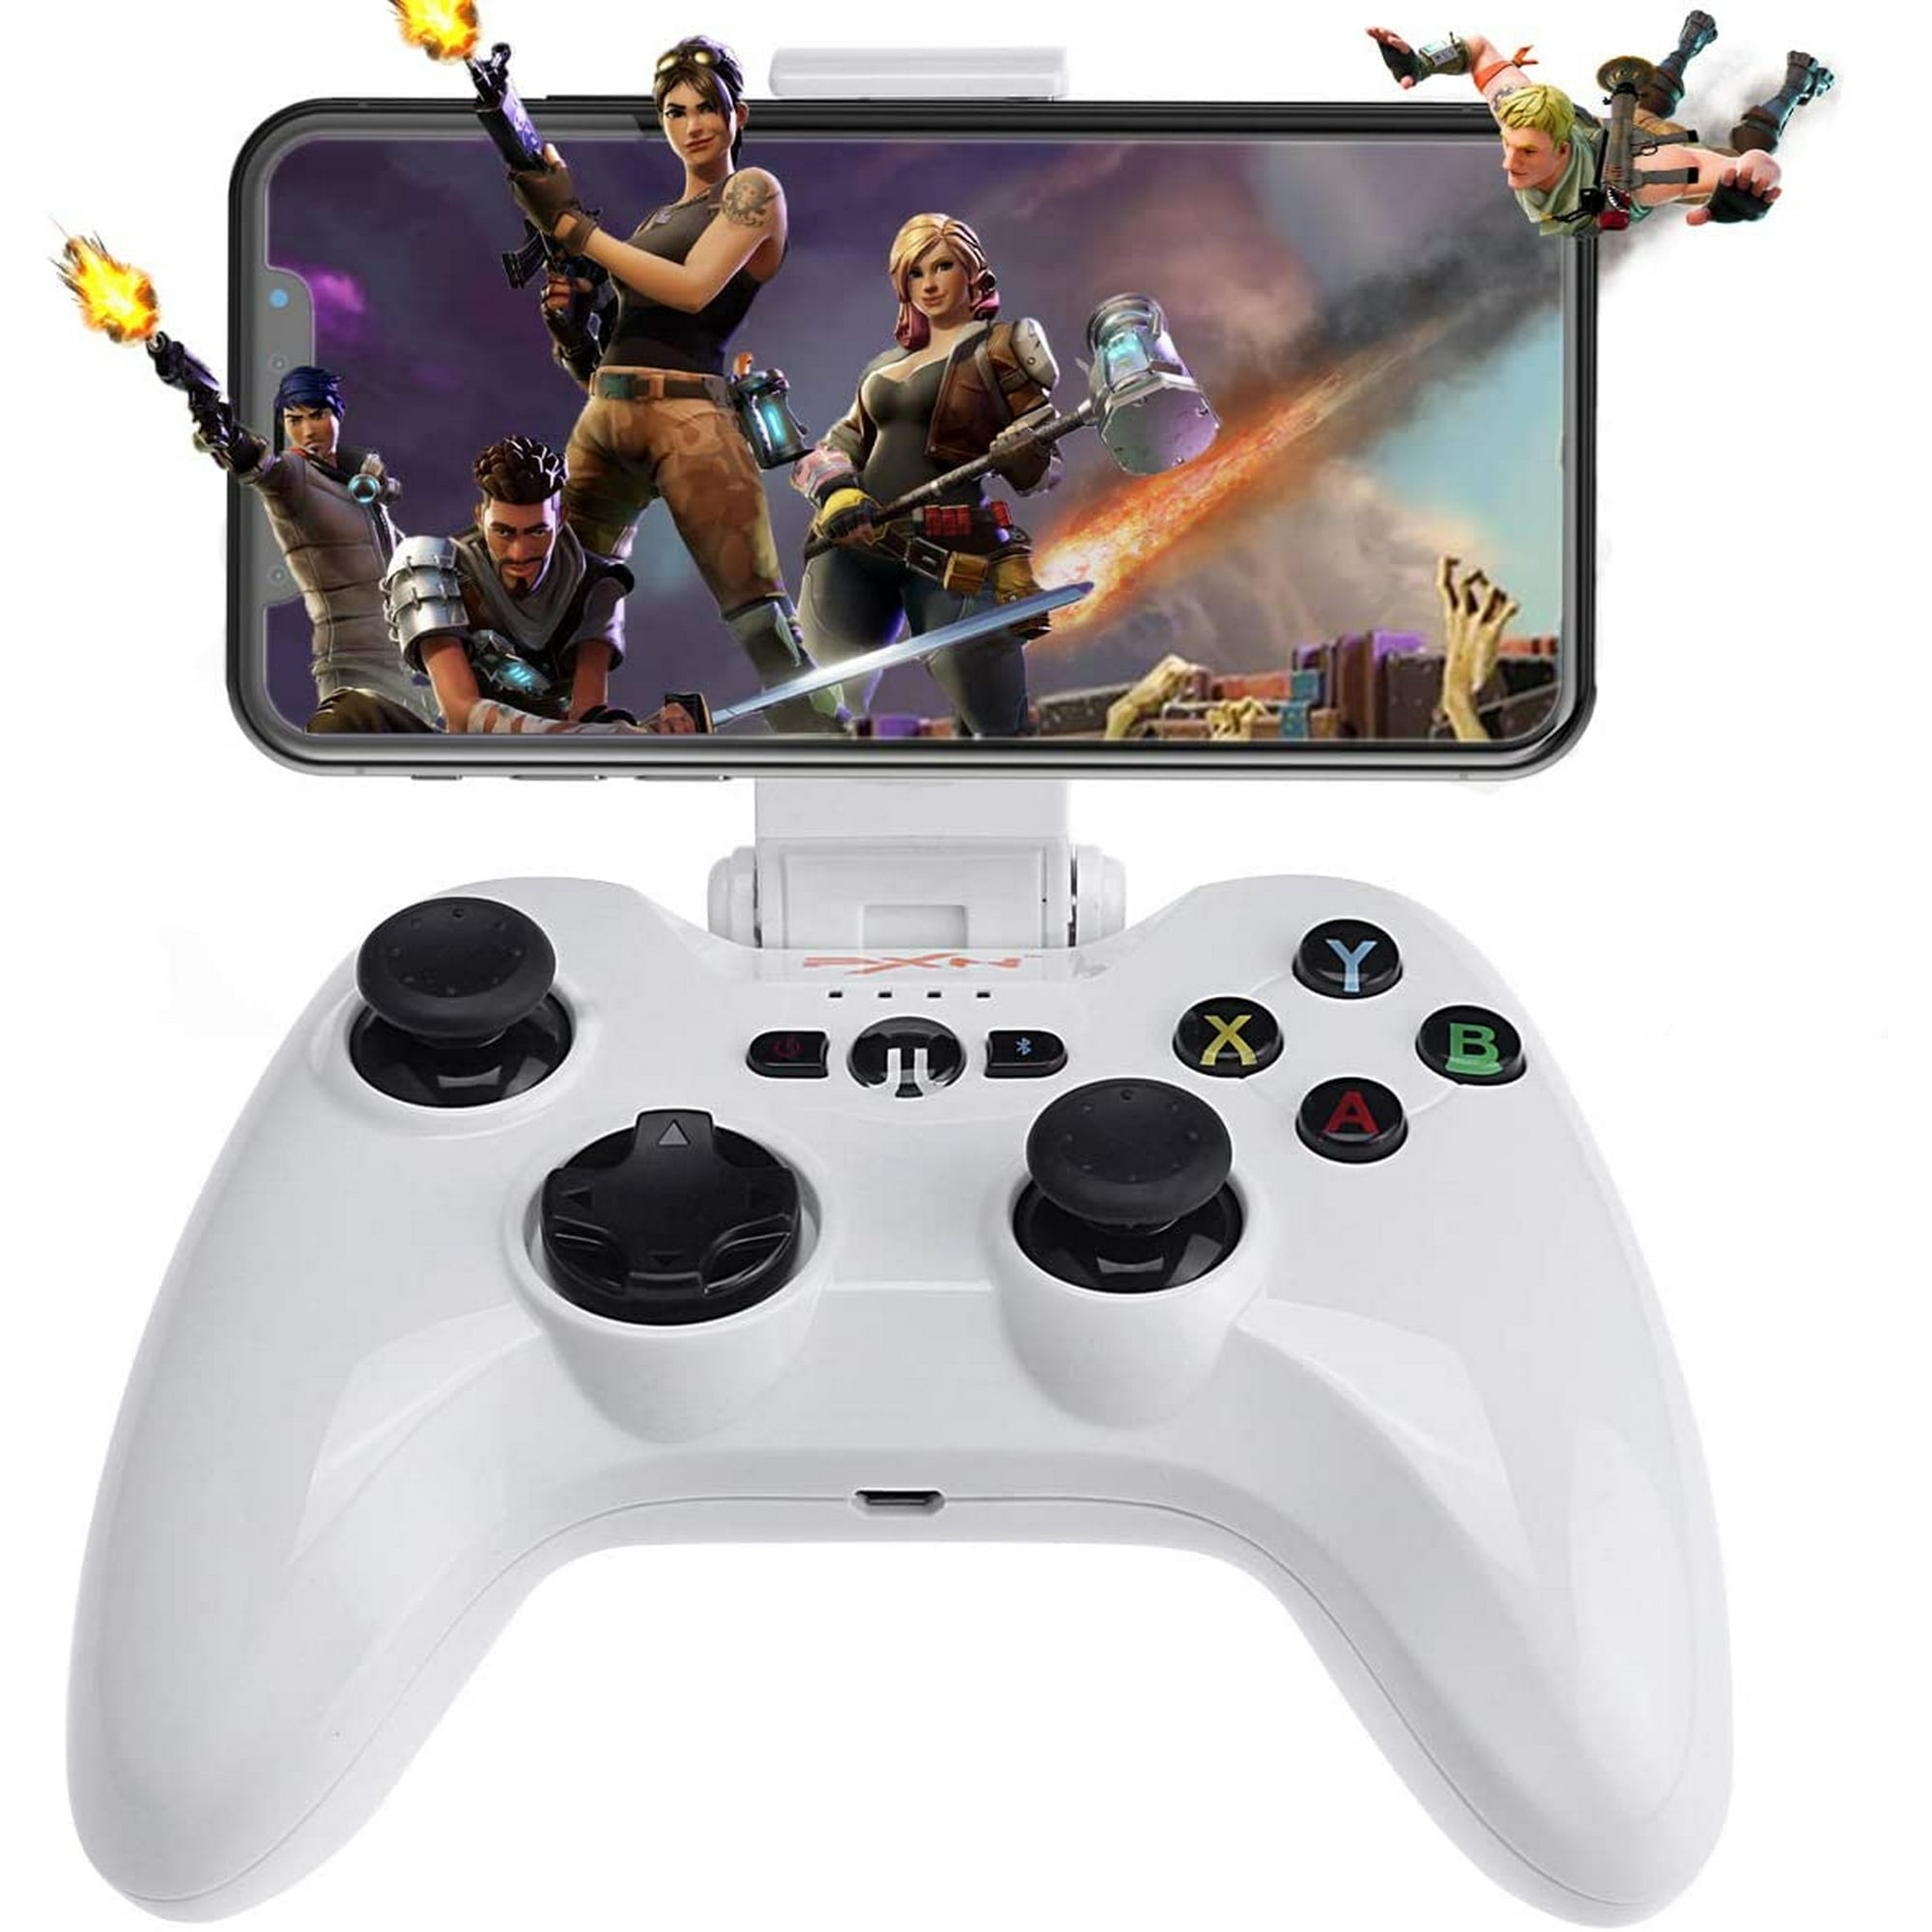 Blaze Ideaal Tom Audreath iOS Wireless Mobile Game Controller, Megadream Gampad Joystick Support for  iPhone Xs, XR X, 8 Plus, 8, 7 Plus, 7 6S 6 | Walmart Canada